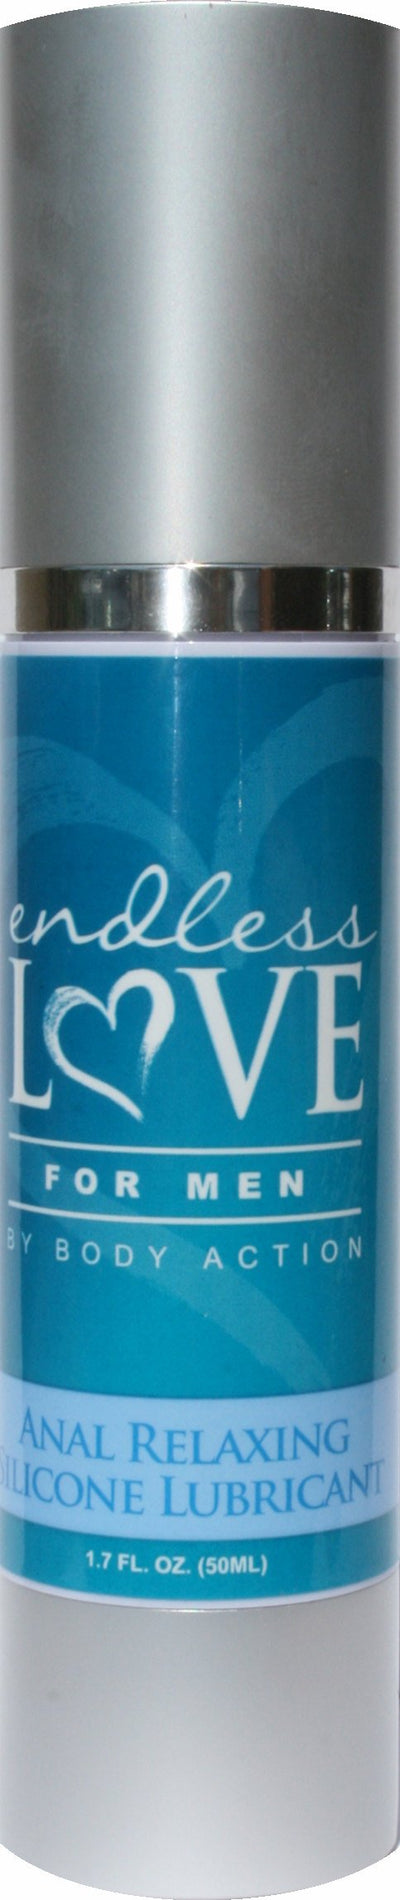 Endless Love For Men Anal Relaxing Silicone Lubricant 1.7 Oz.